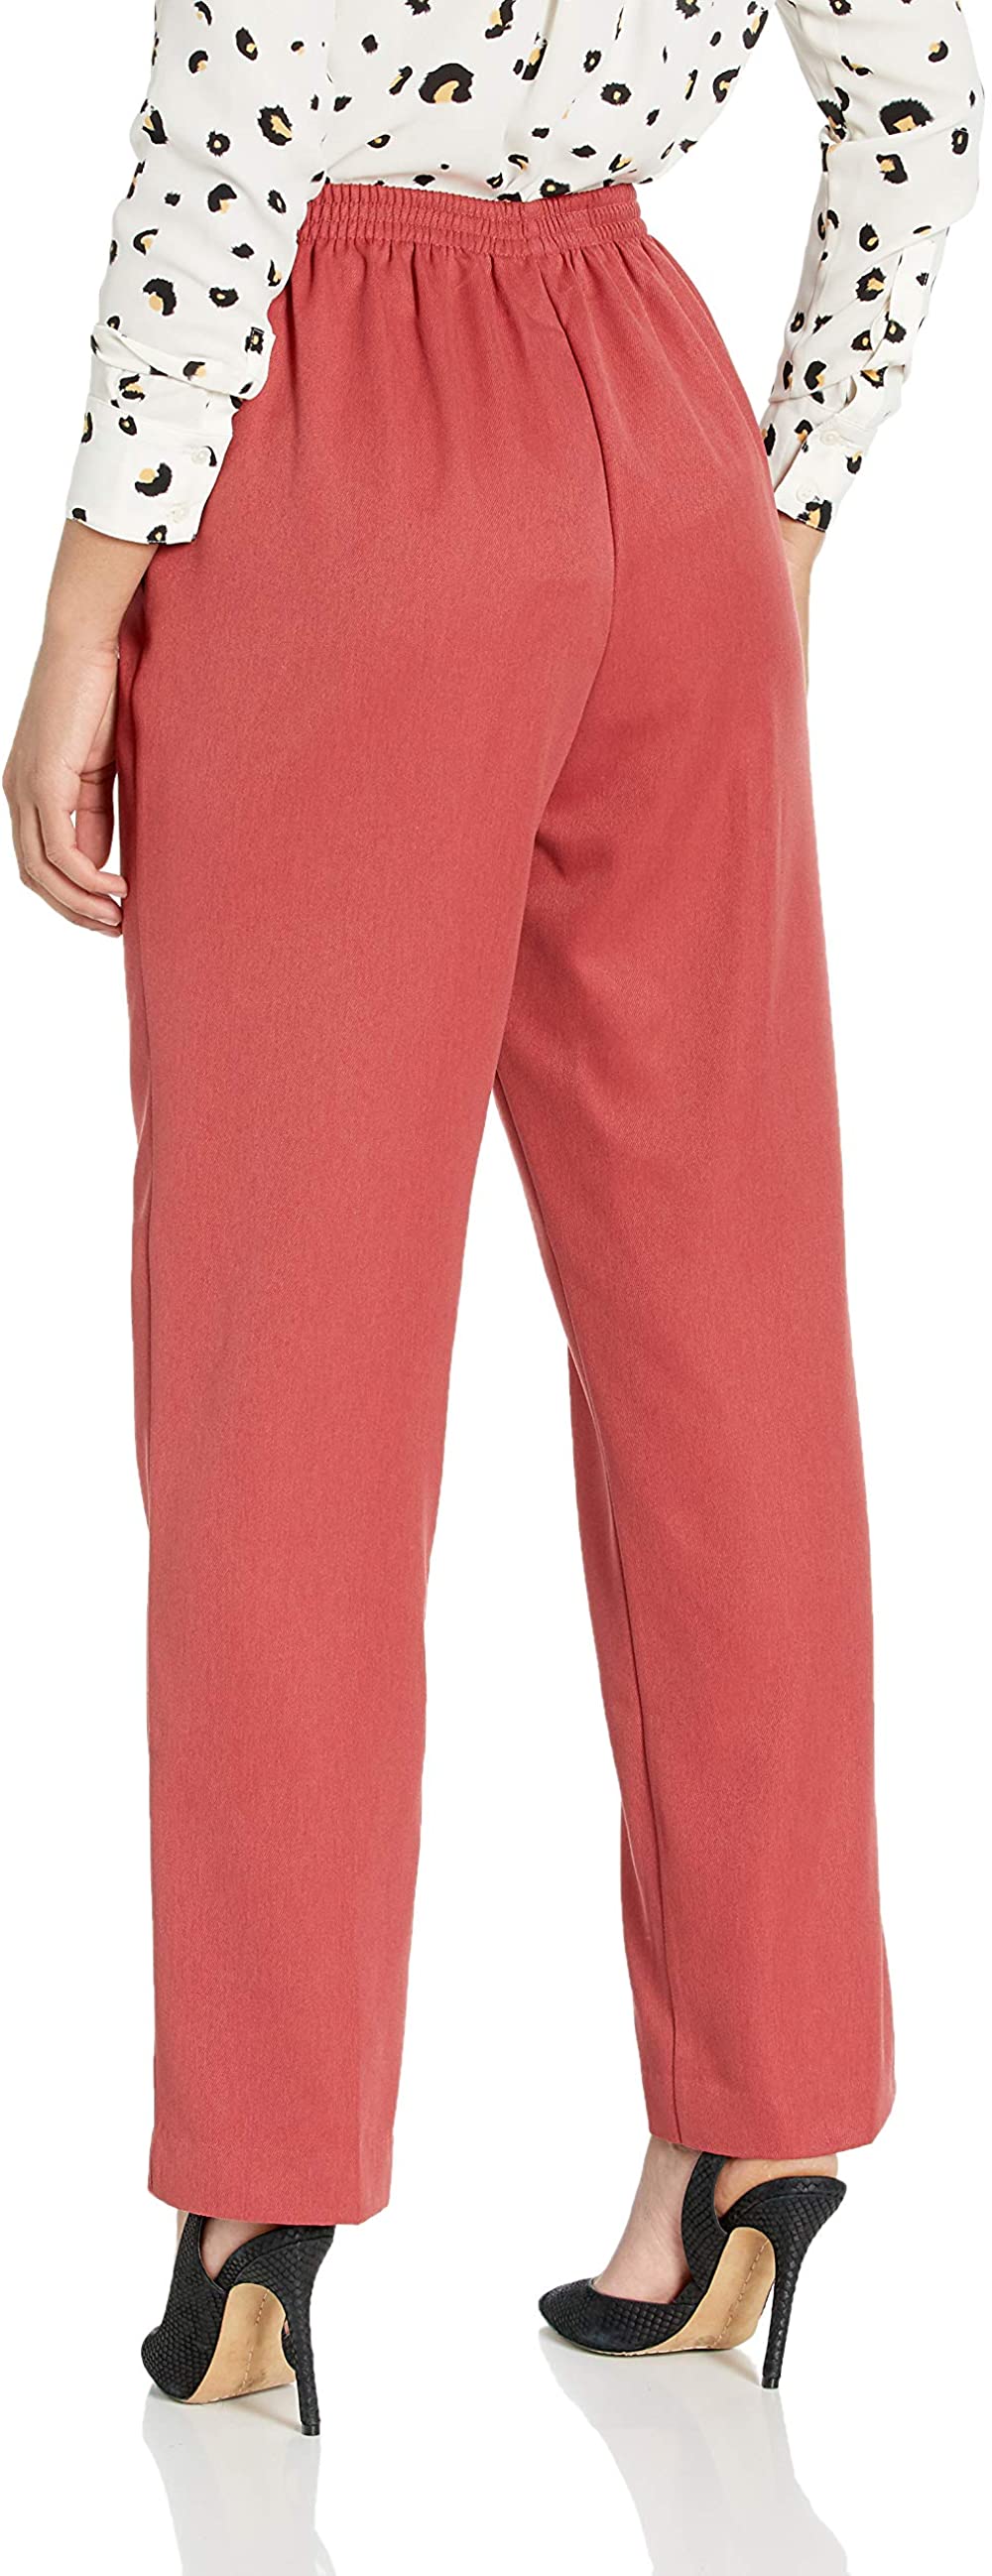 Alfred Dunner Womens Sunset Canyon Pull On Pants